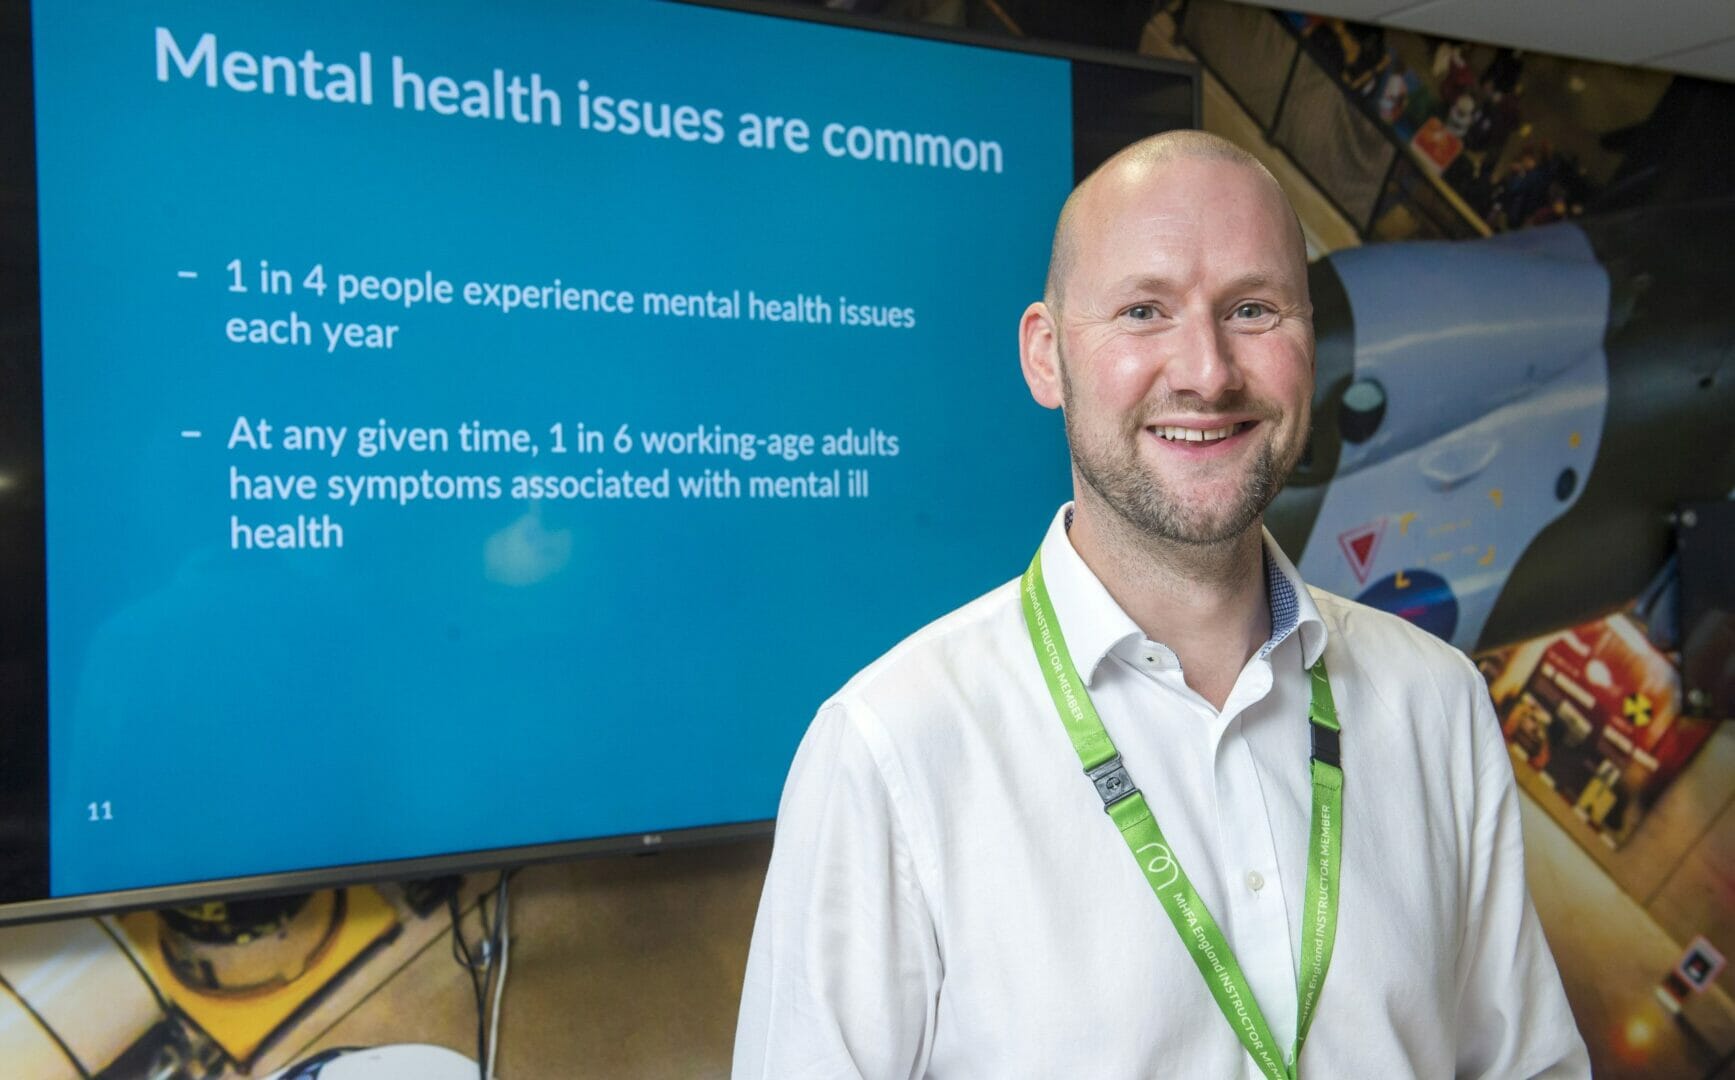 Mental Health Awareness Week: Safety Expert Shares Three Key Areas of Focus for Positive Mental Health and Wellbeing in the Workplace @Arco_Services